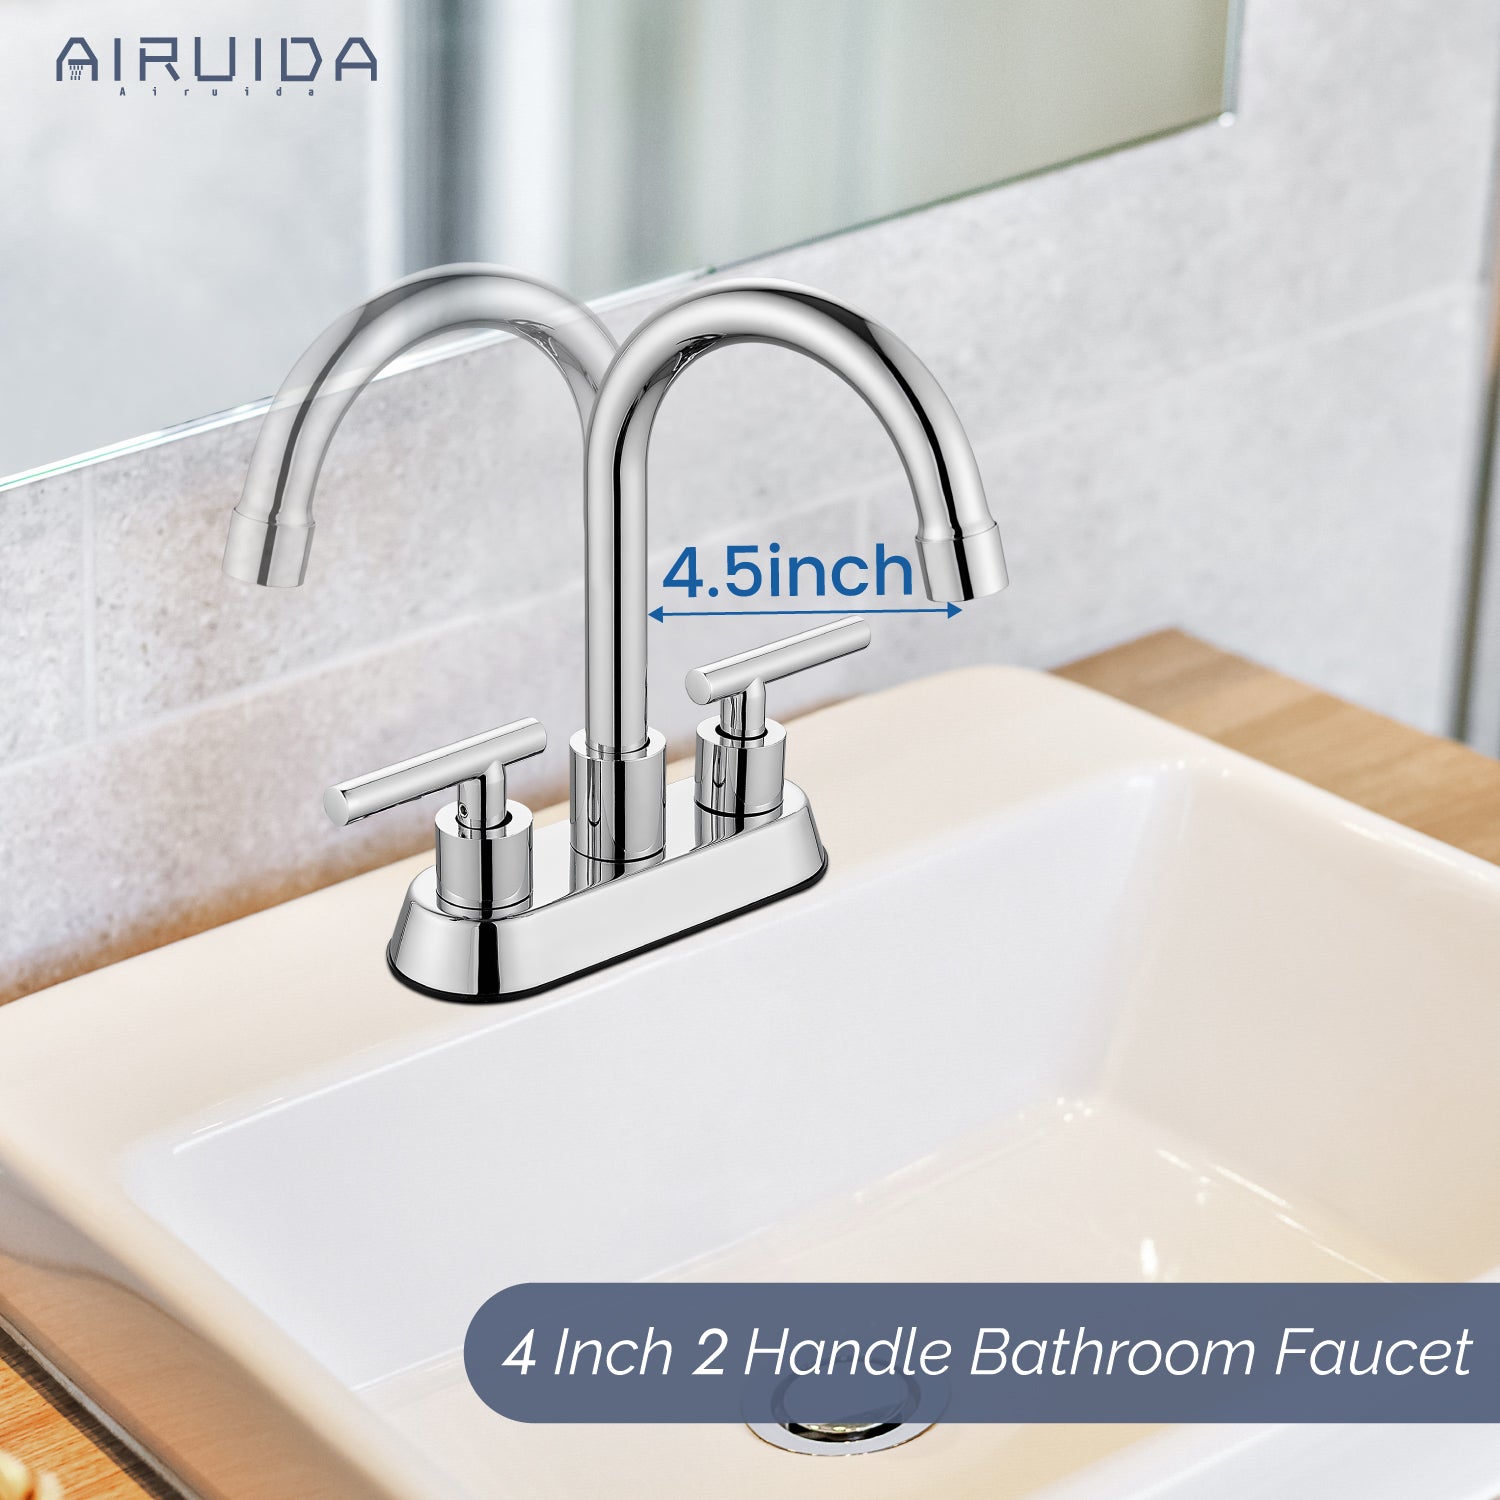 Airuida Bathroom Faucet 4 inch Centerset Two Handle Bathroom Sink Faucet 360°Swivel Spout Bathroom Faucet with Supply Hoses and Pop Up Drain Deck Mount